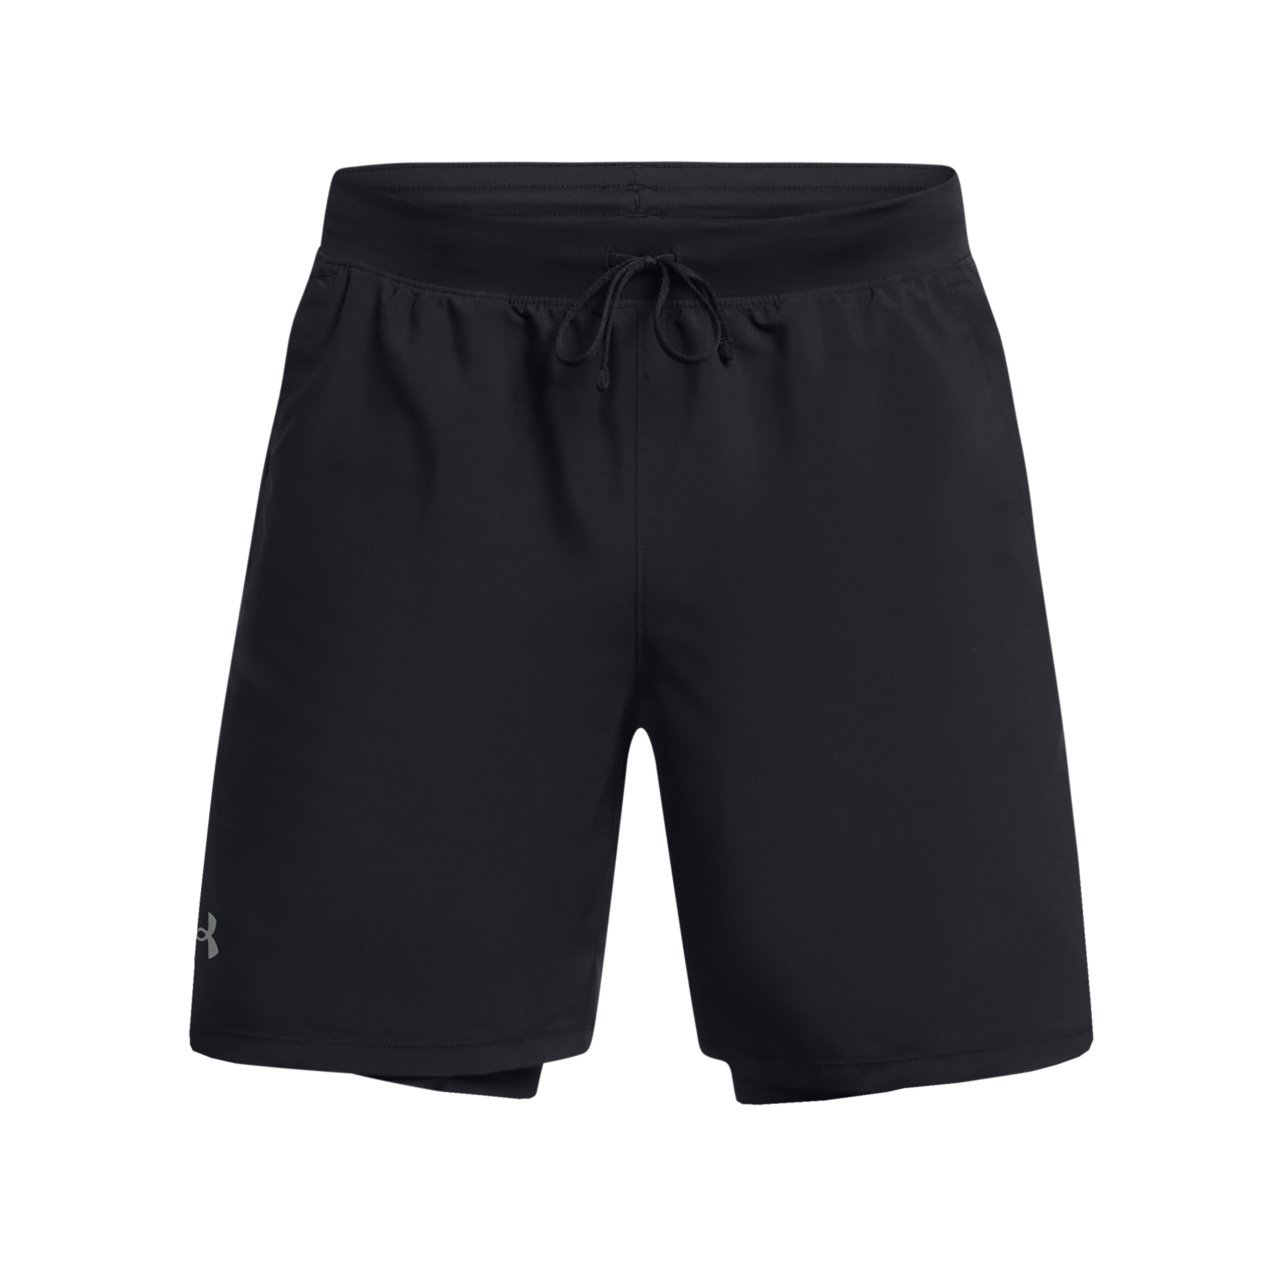 5: Under Armour Launch 7" 2-i-1 Shorts Herre